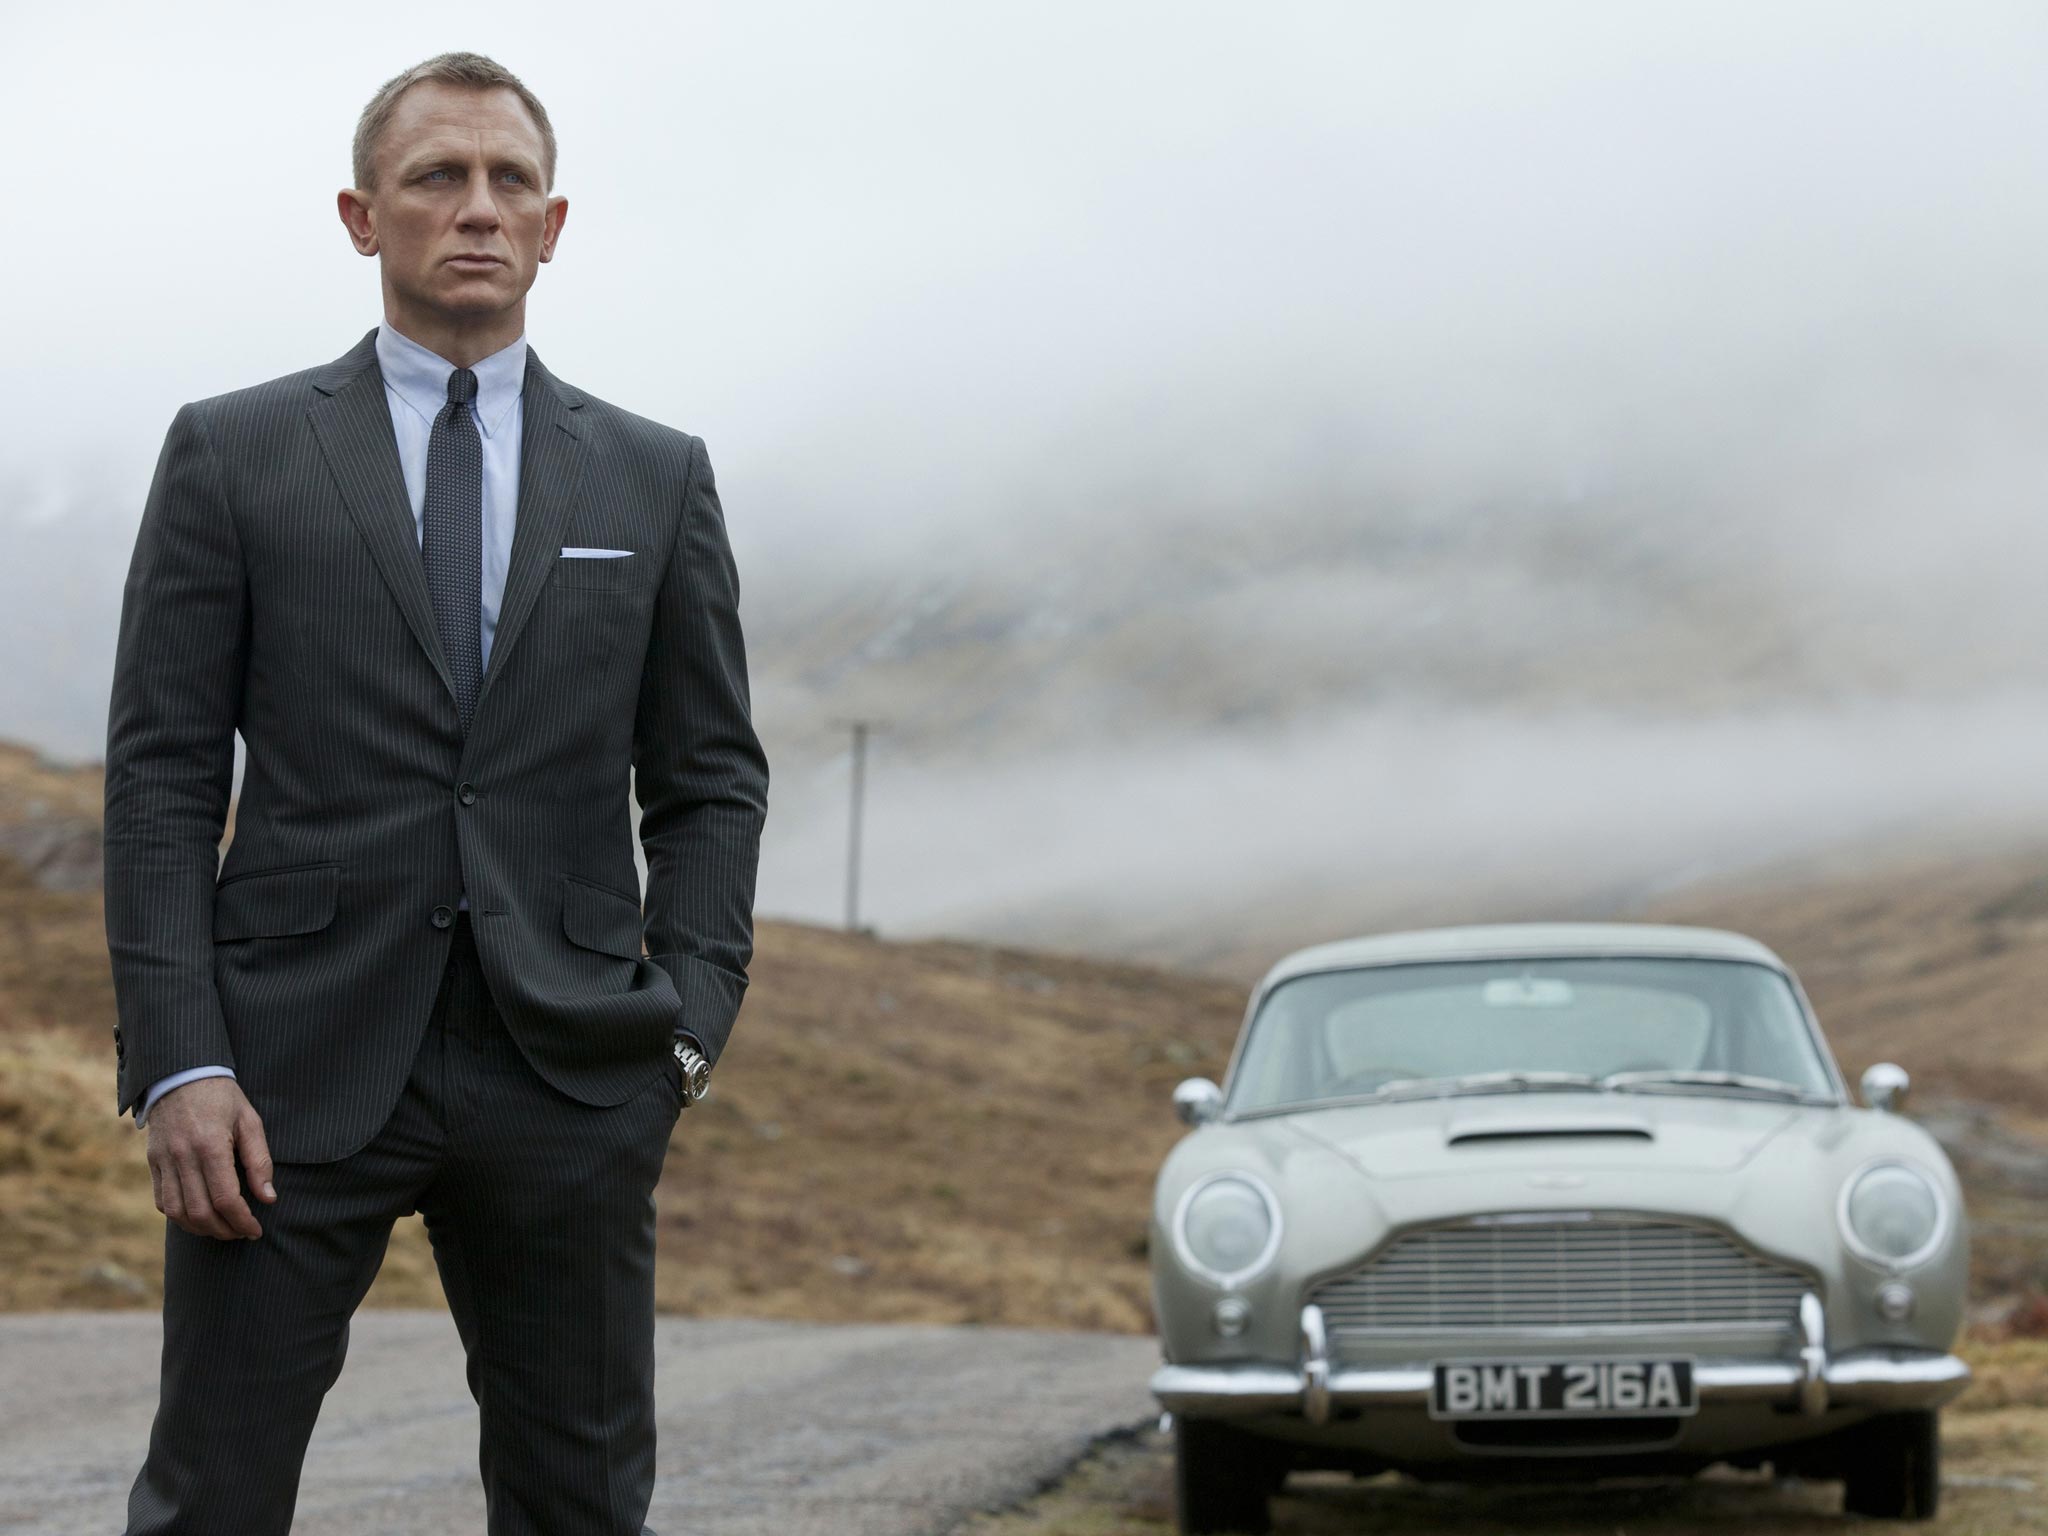 Speculation over who might succeed Daniel Craig as the next Bond has become national news